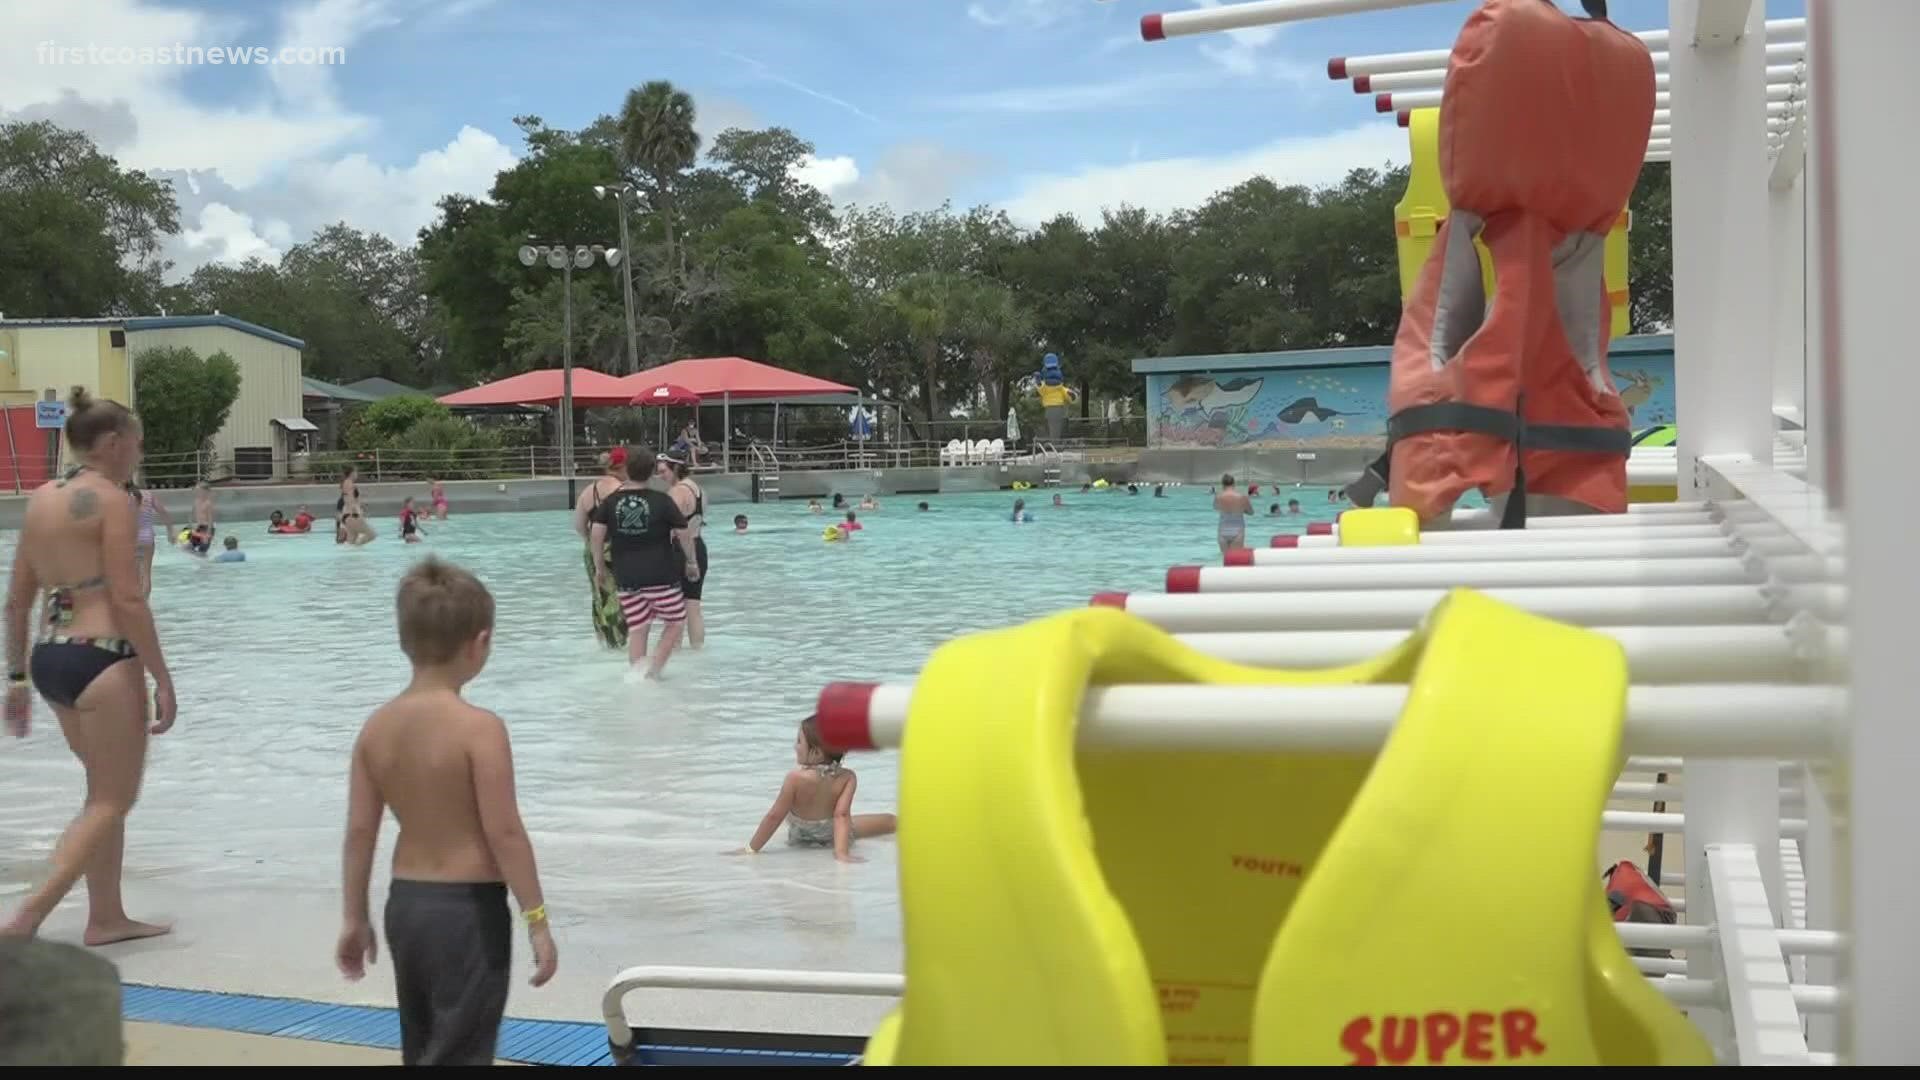 The waterpark and arcade was set to close in Oct. 2021.